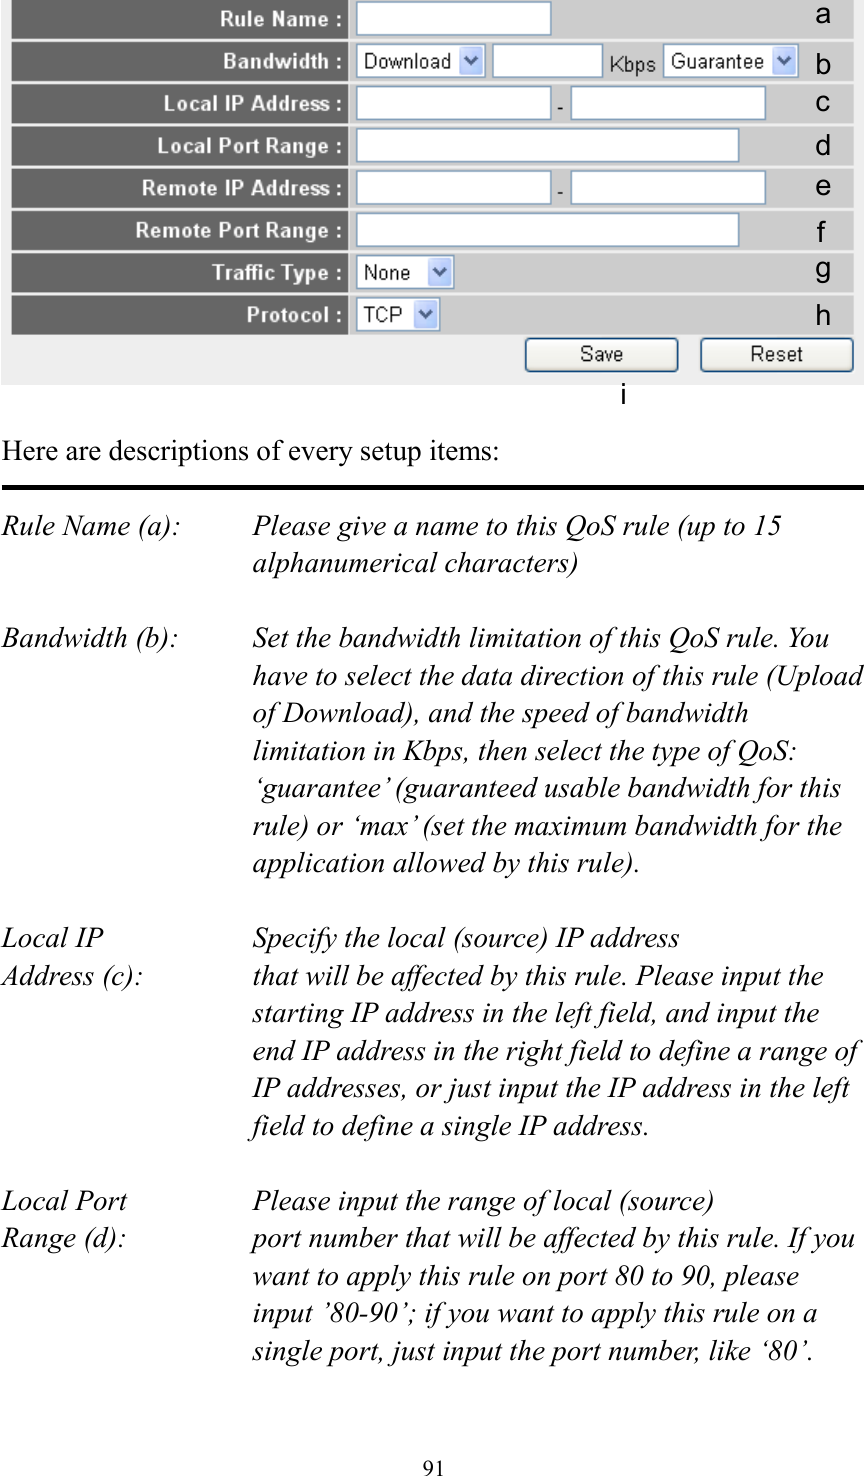 91   Here are descriptions of every setup items:  Rule Name (a):    Please give a name to this QoS rule (up to 15 alphanumerical characters)  Bandwidth (b):    Set the bandwidth limitation of this QoS rule. You have to select the data direction of this rule (Upload of Download), and the speed of bandwidth limitation in Kbps, then select the type of QoS: ‘guarantee’ (guaranteed usable bandwidth for this rule) or ‘max’ (set the maximum bandwidth for the application allowed by this rule).  Local IP        Specify the local (source) IP address Address (c):     that will be affected by this rule. Please input the starting IP address in the left field, and input the end IP address in the right field to define a range of IP addresses, or just input the IP address in the left field to define a single IP address.  Local Port       Please input the range of local (source) Range (d):    port number that will be affected by this rule. If you want to apply this rule on port 80 to 90, please input ’80-90’; if you want to apply this rule on a single port, just input the port number, like ‘80’.  a b c d e f g h i 